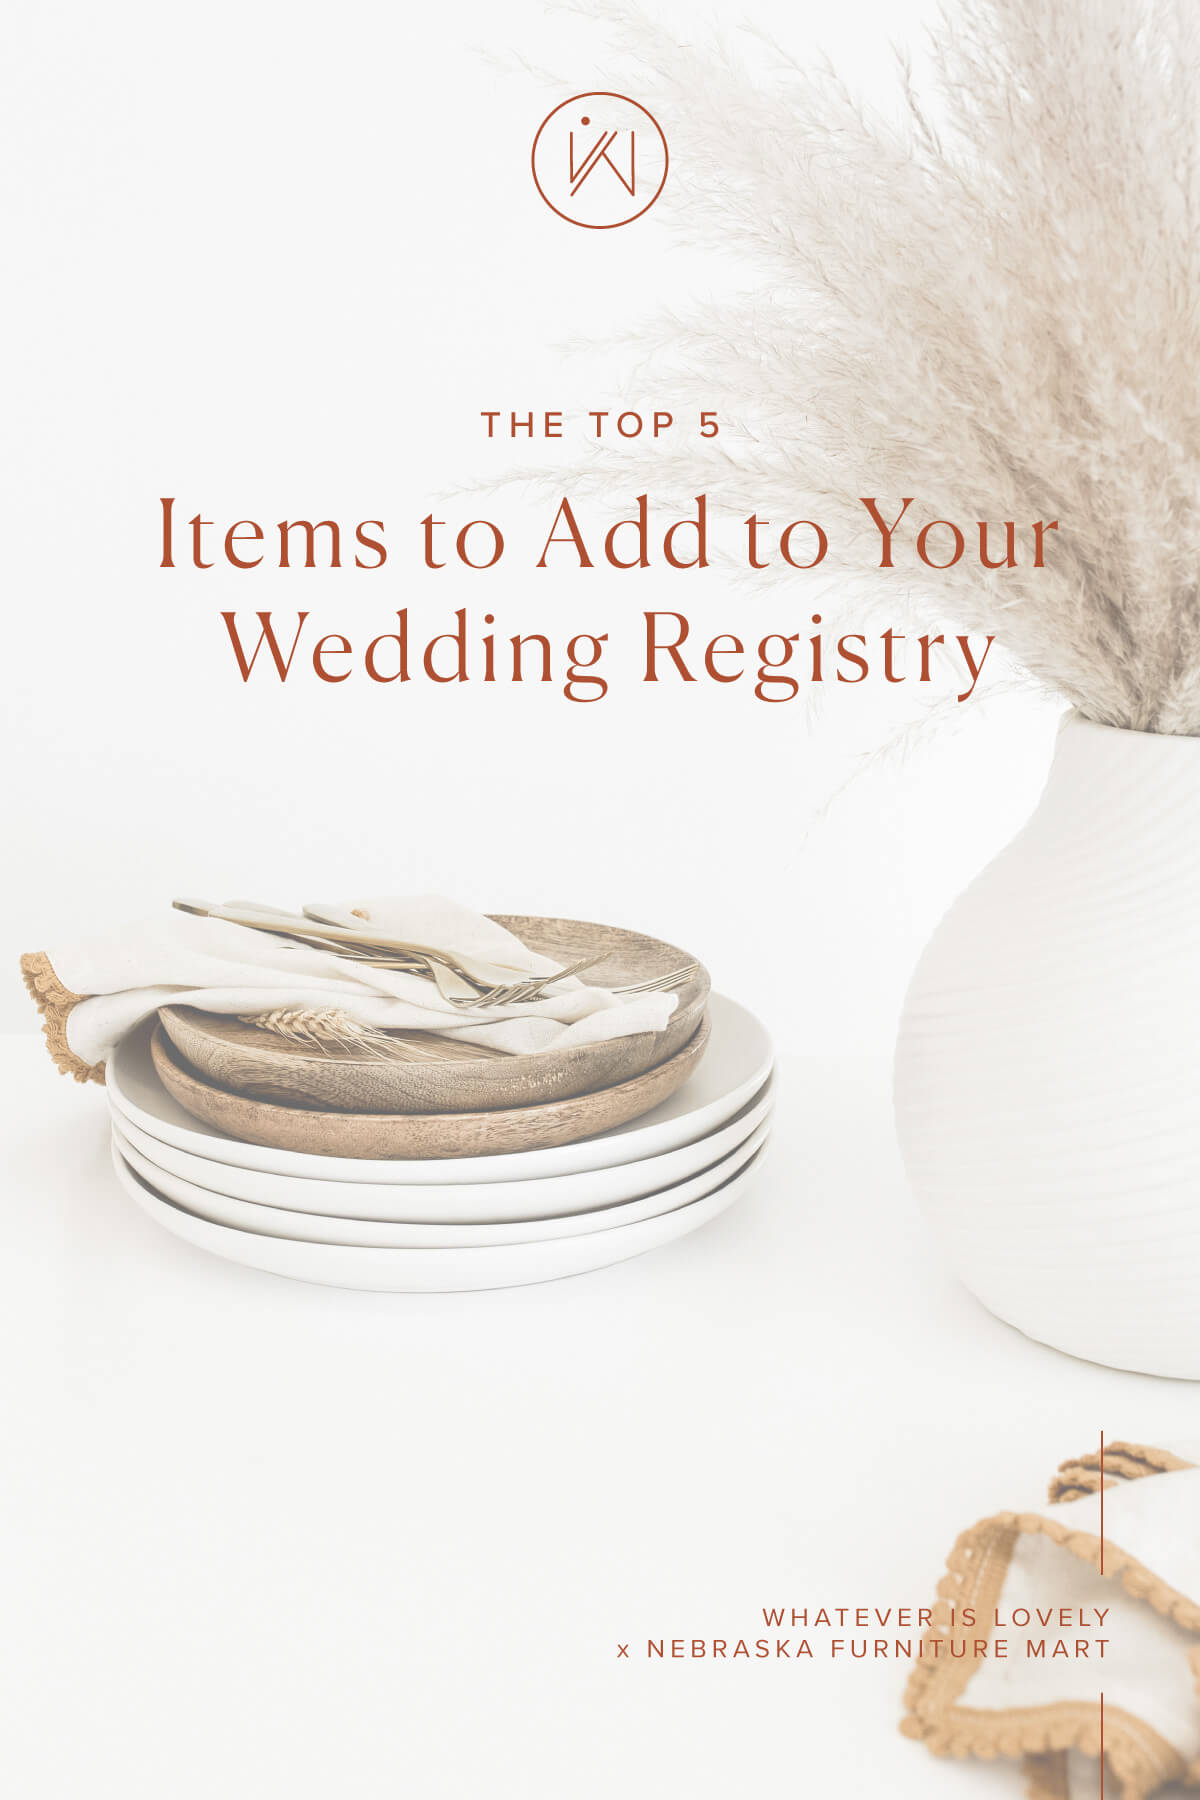 https://lovelyweddingskc.com/wp-content/uploads/sites/27677/2020/03/Top-5-Items-to-Add-to-Your-Wedding-Registry.jpg